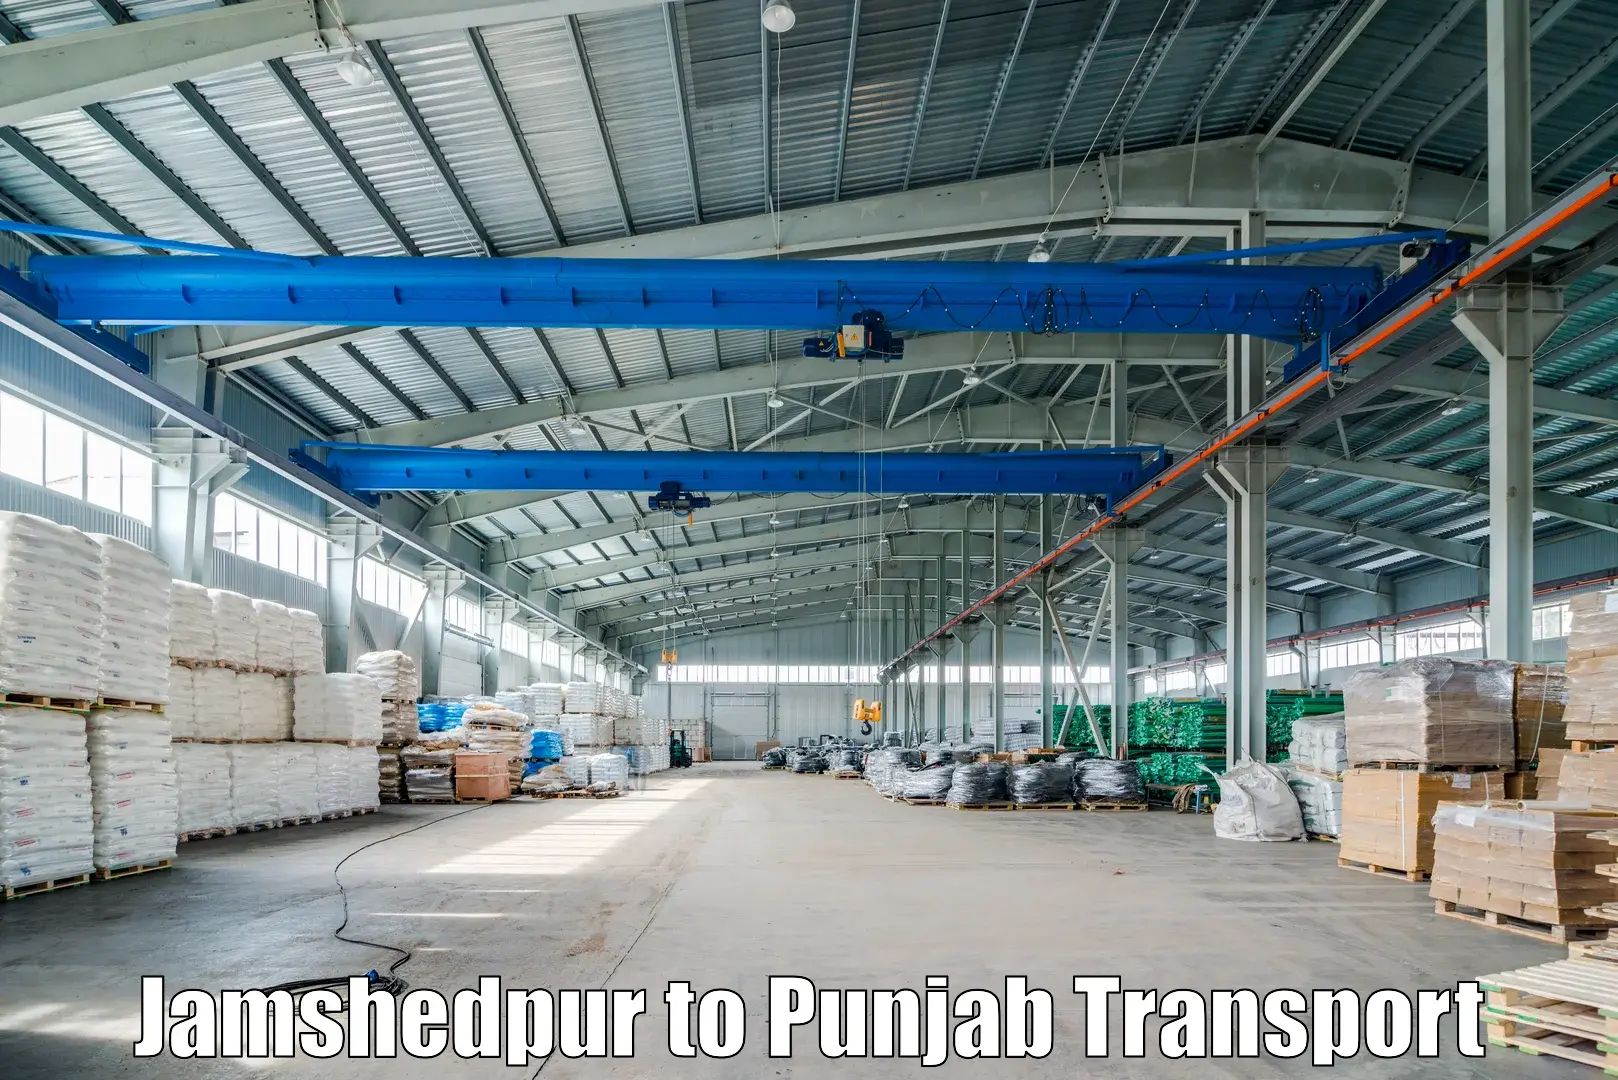 Transport in sharing Jamshedpur to Malout